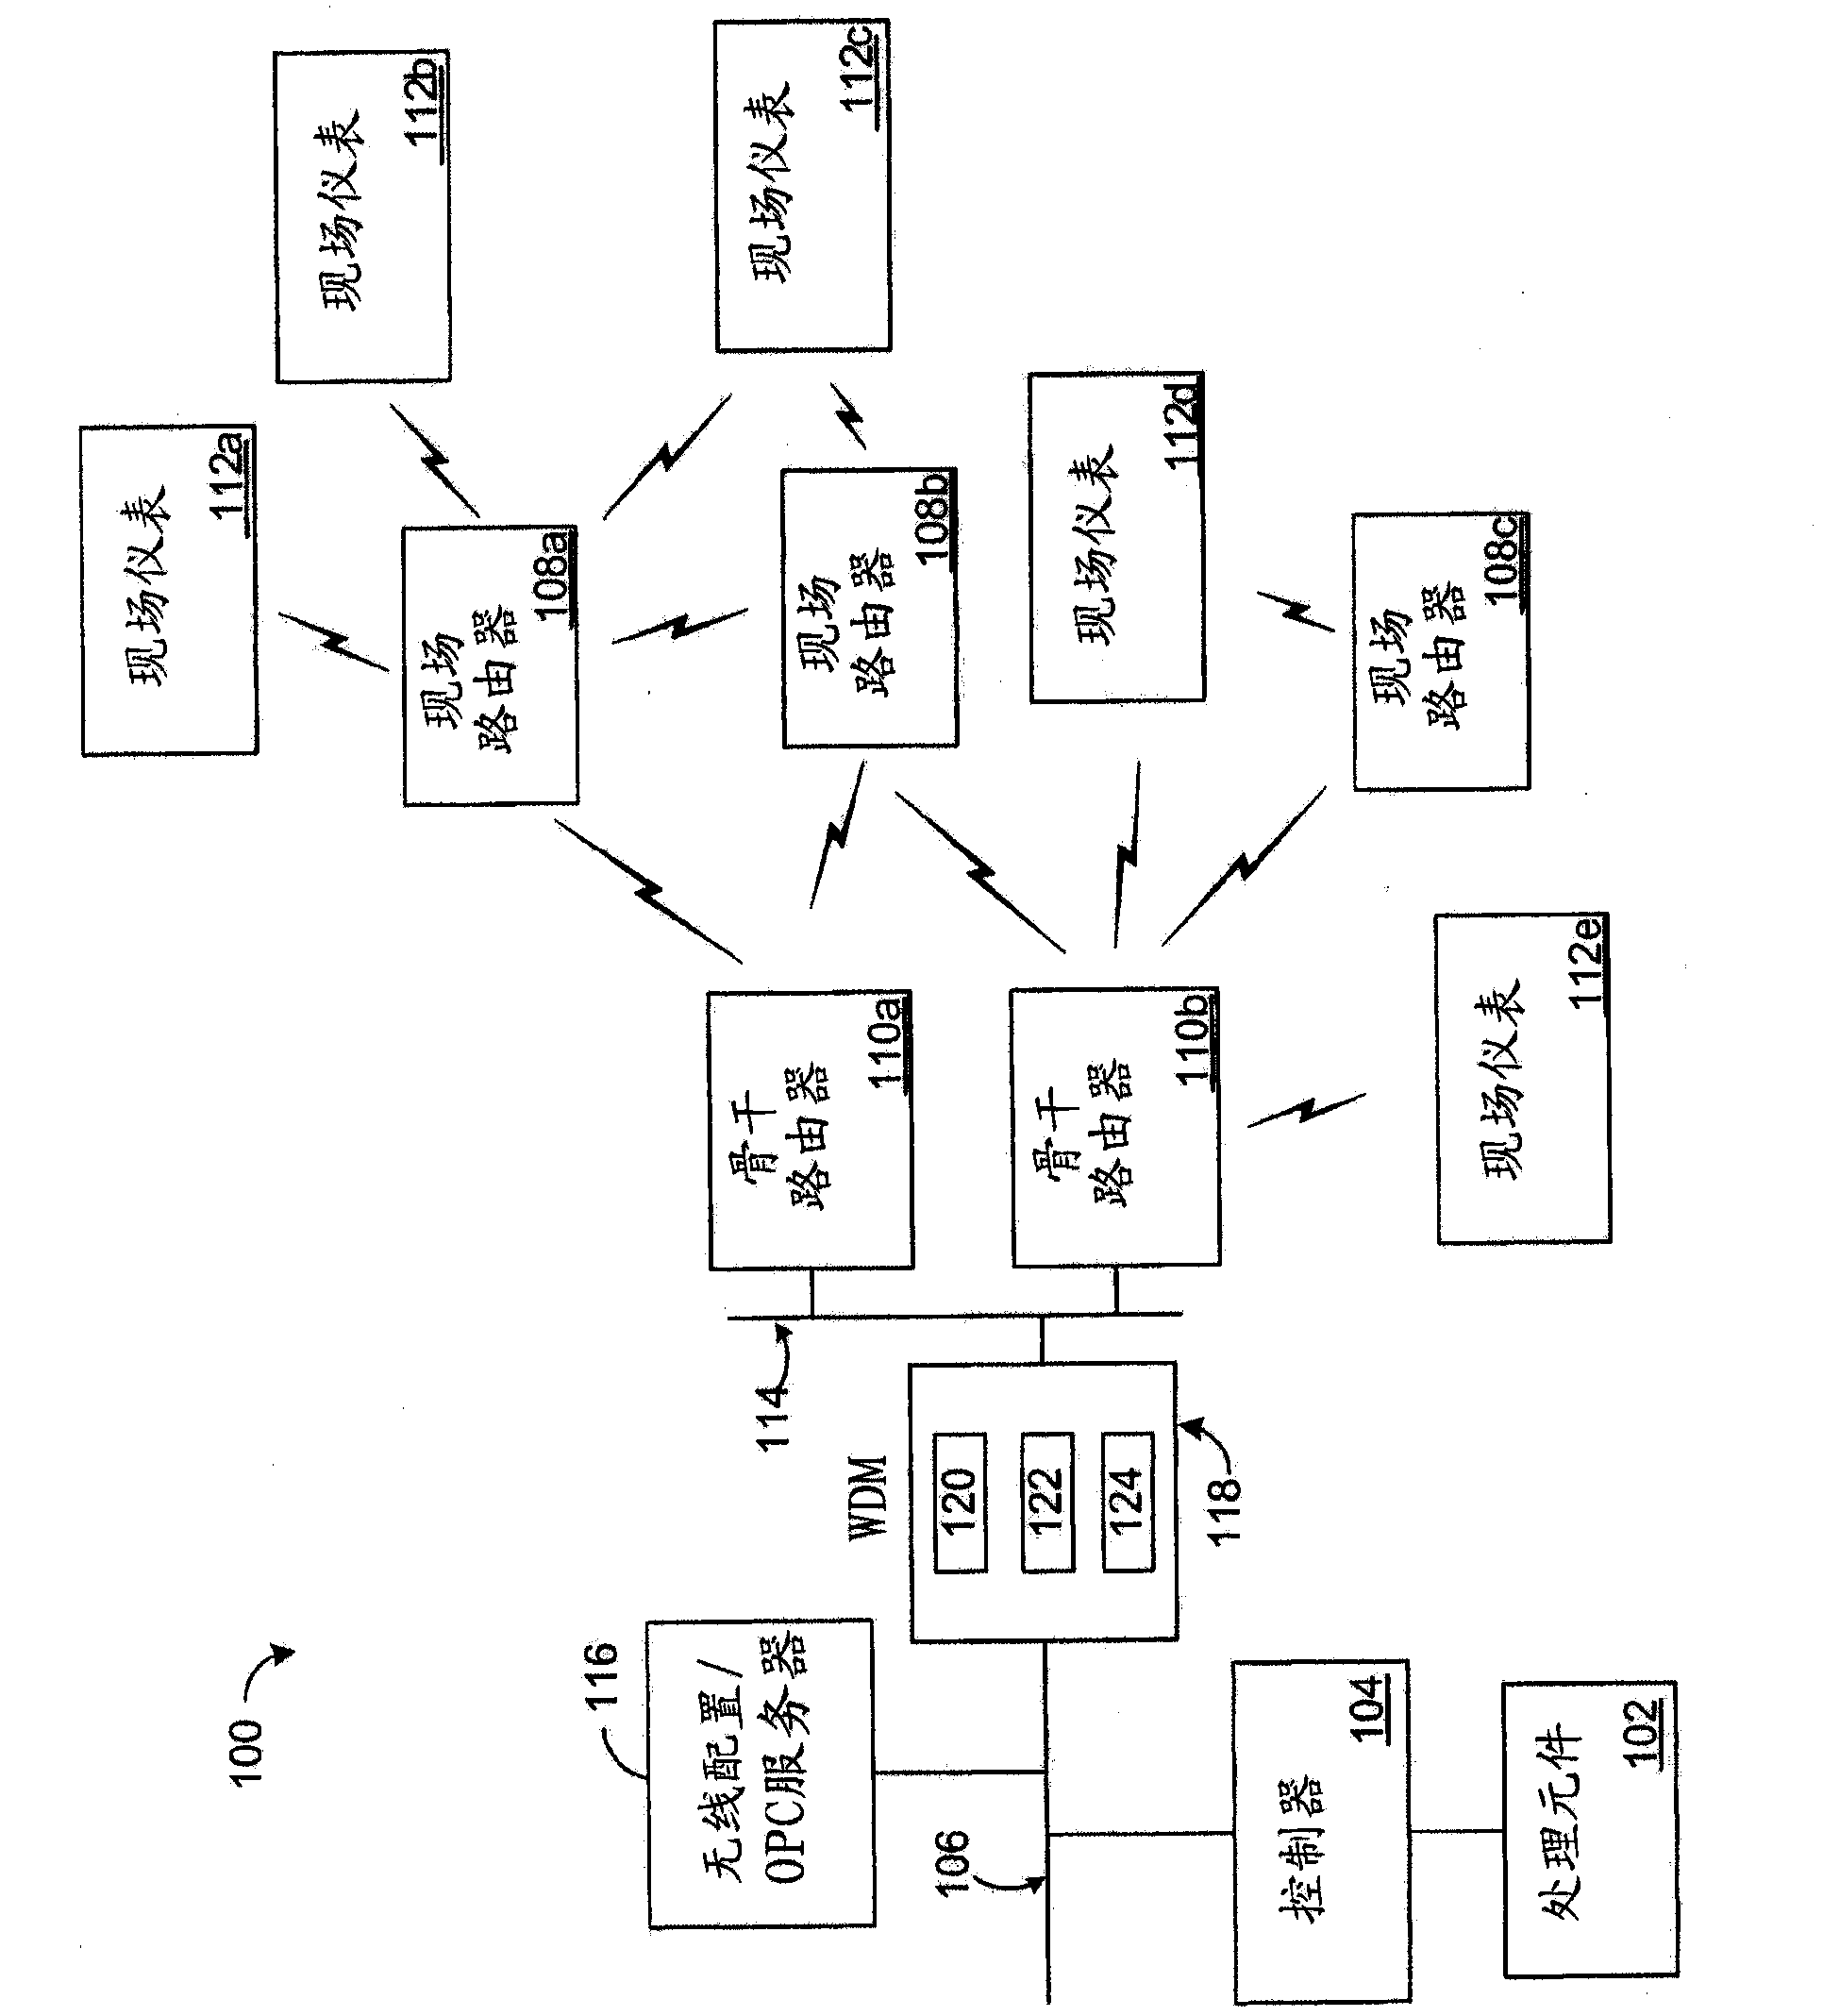 Apparatus and method for maintaining reliability of wireless network having asymmetric or other low quality wireless links